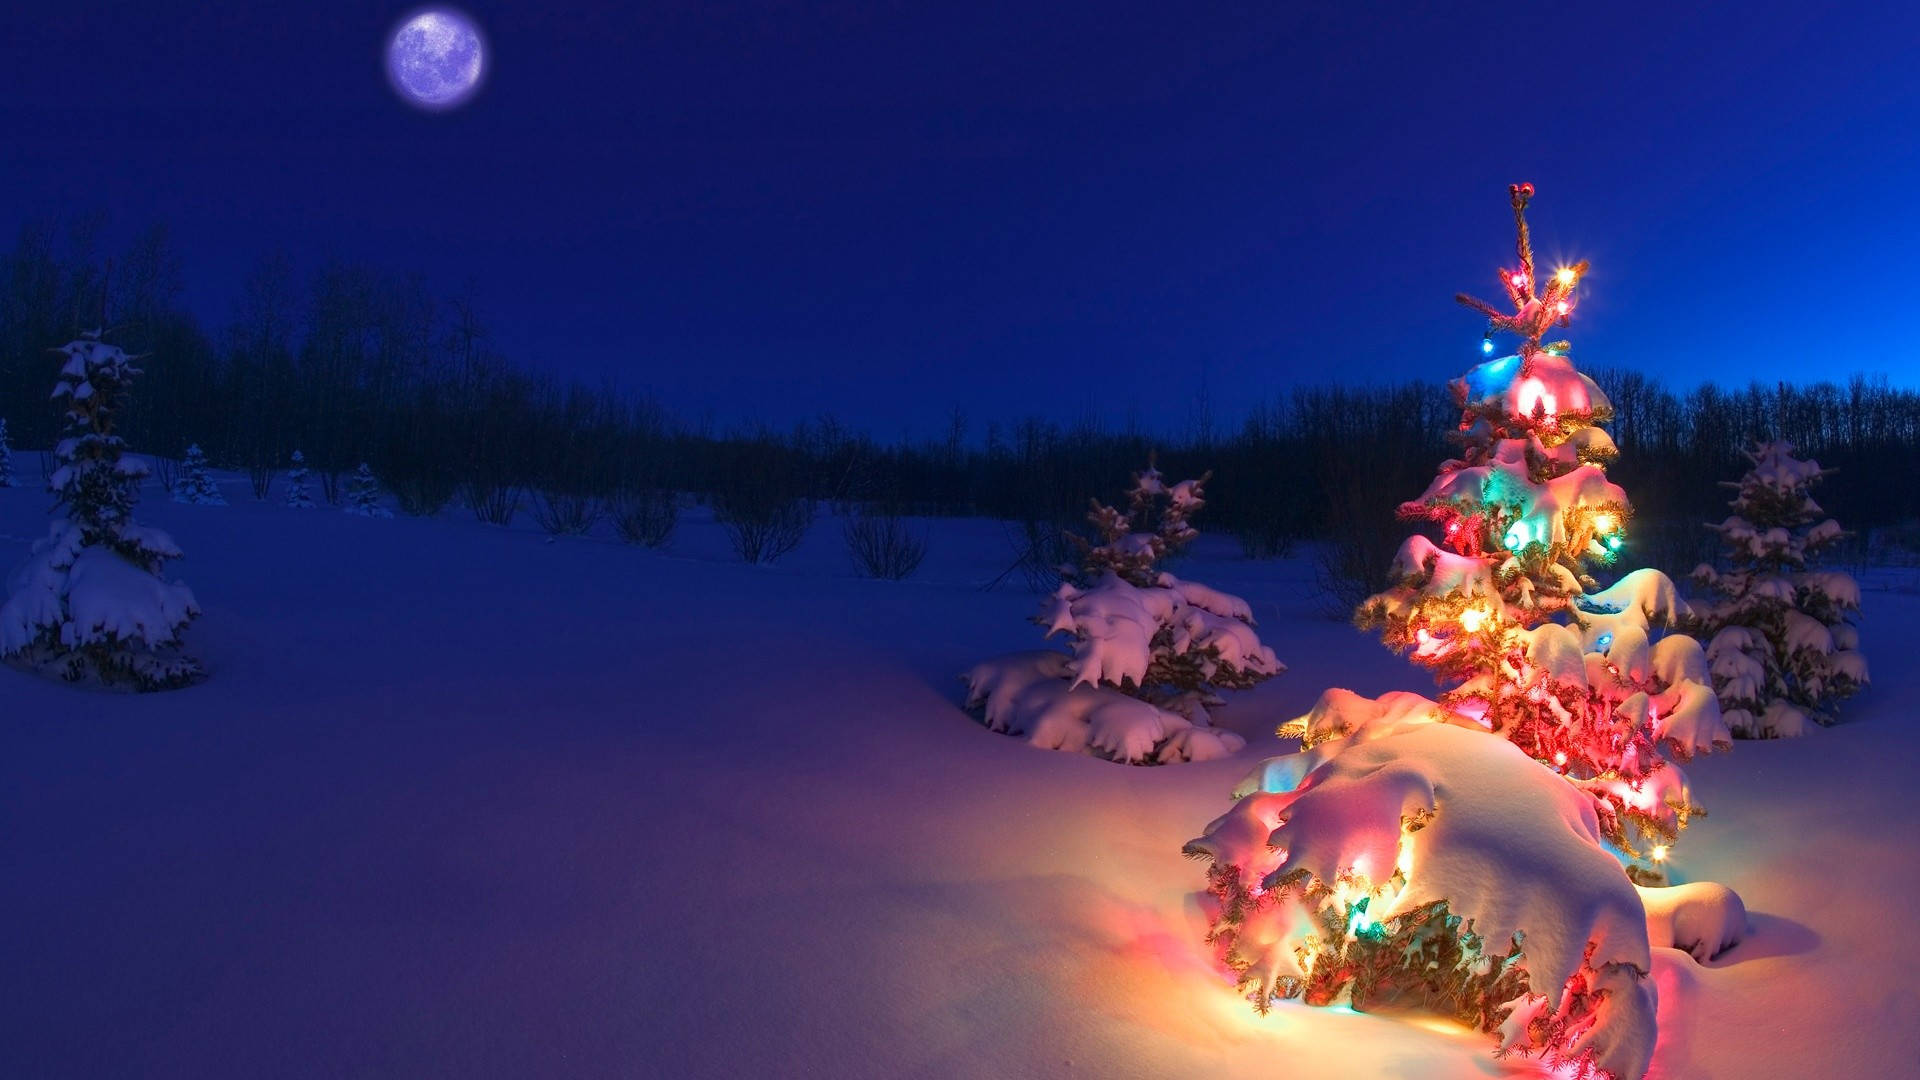 Evening Winter Merry Christmas Hd Background